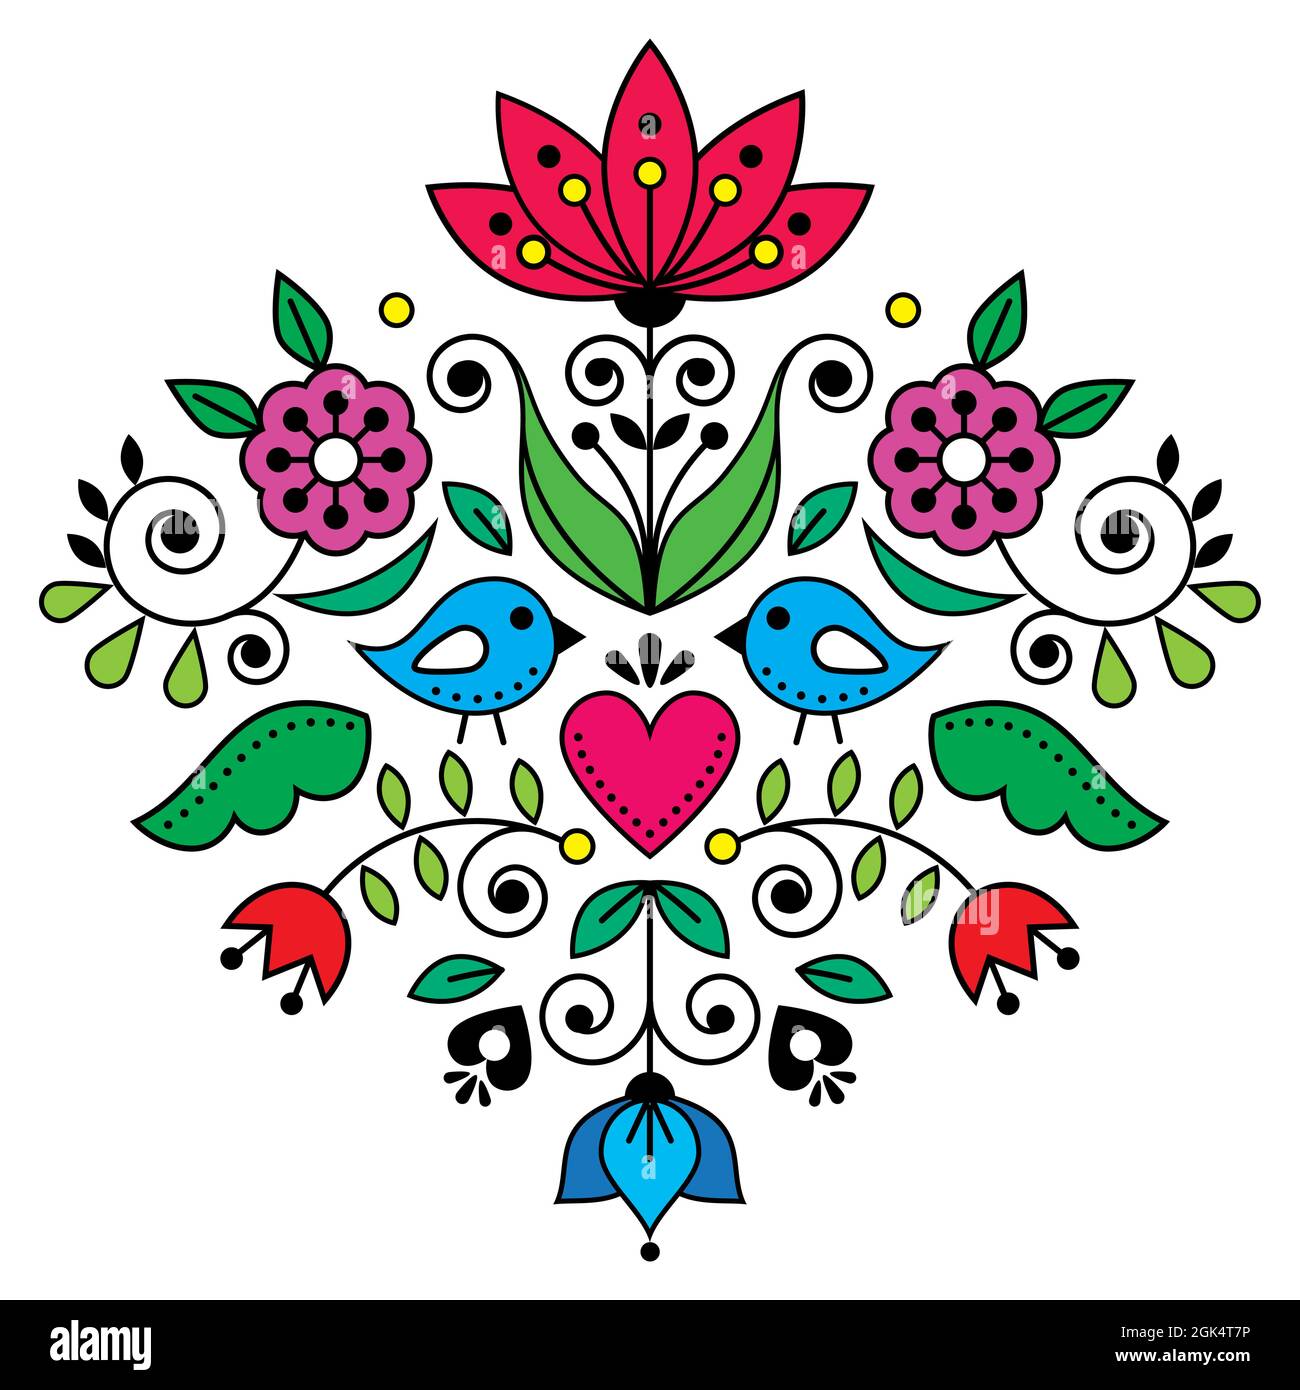 Scandianvian traditional folk art vector design with flowers and birds, inspired by traditional embroidery patterns from Sweden Stock Vector